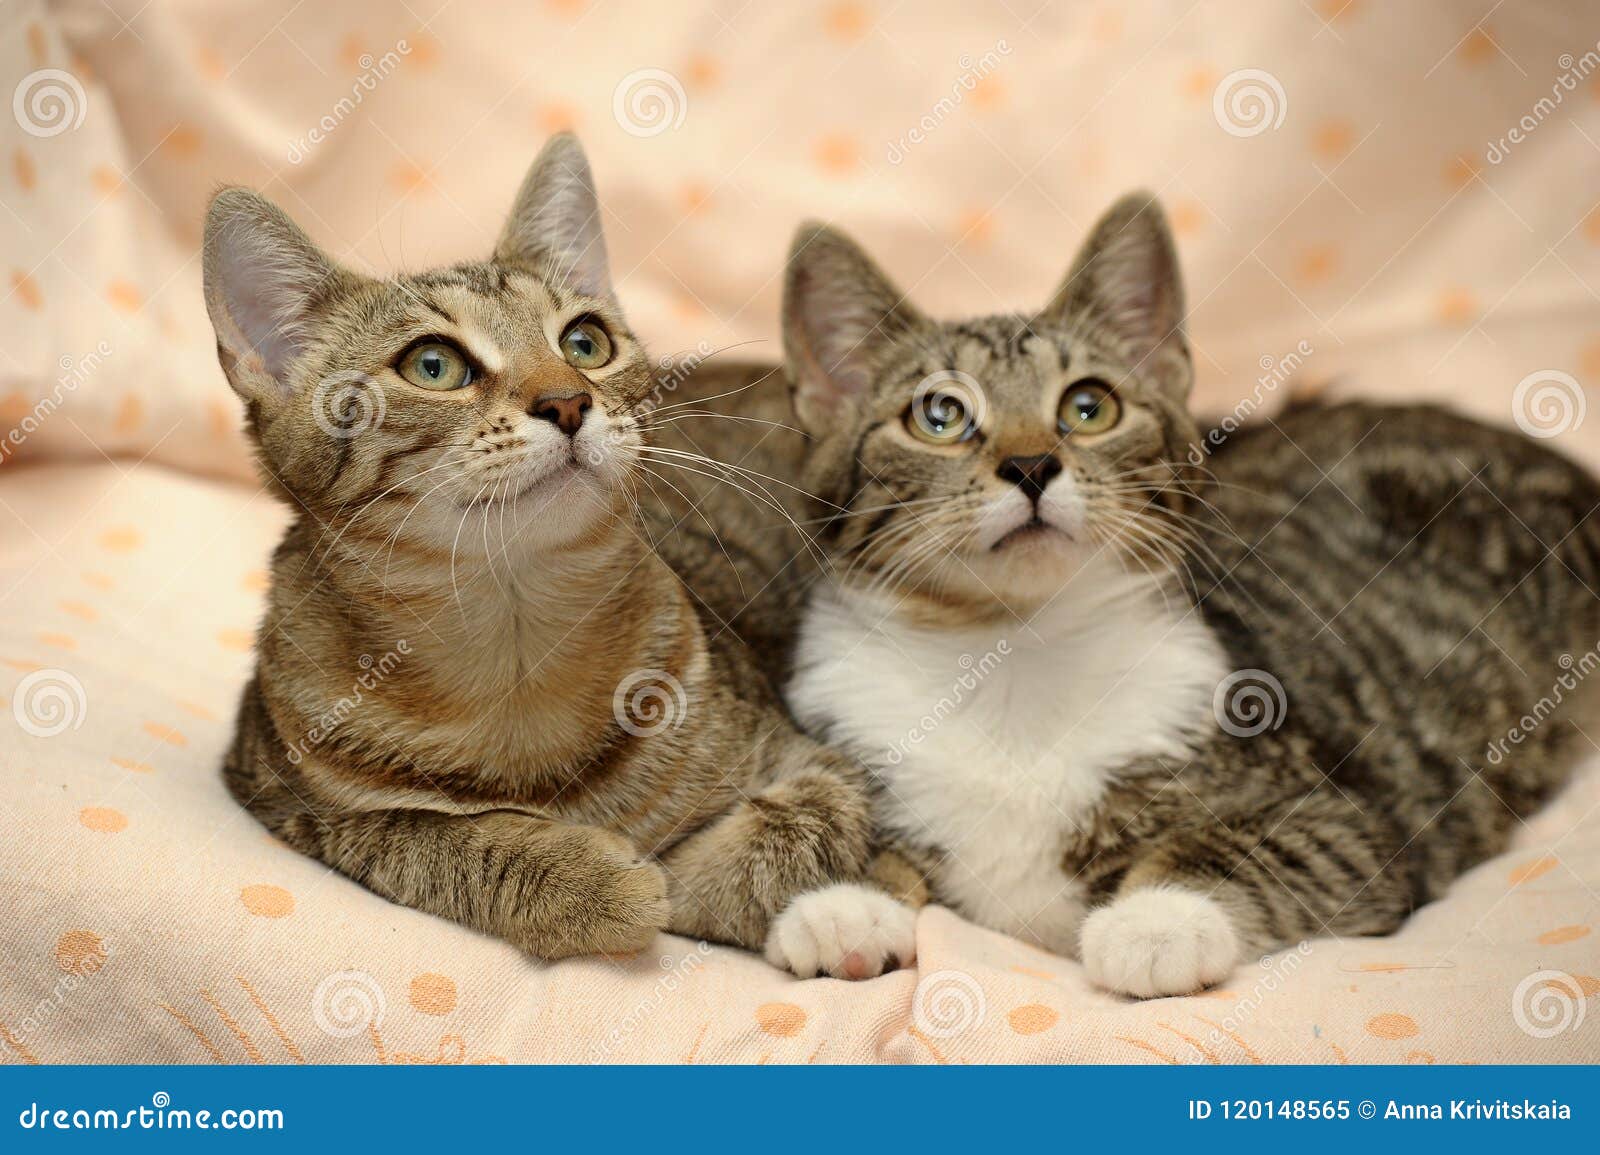 Two cats love each other, stock image. Image of group - 120148565